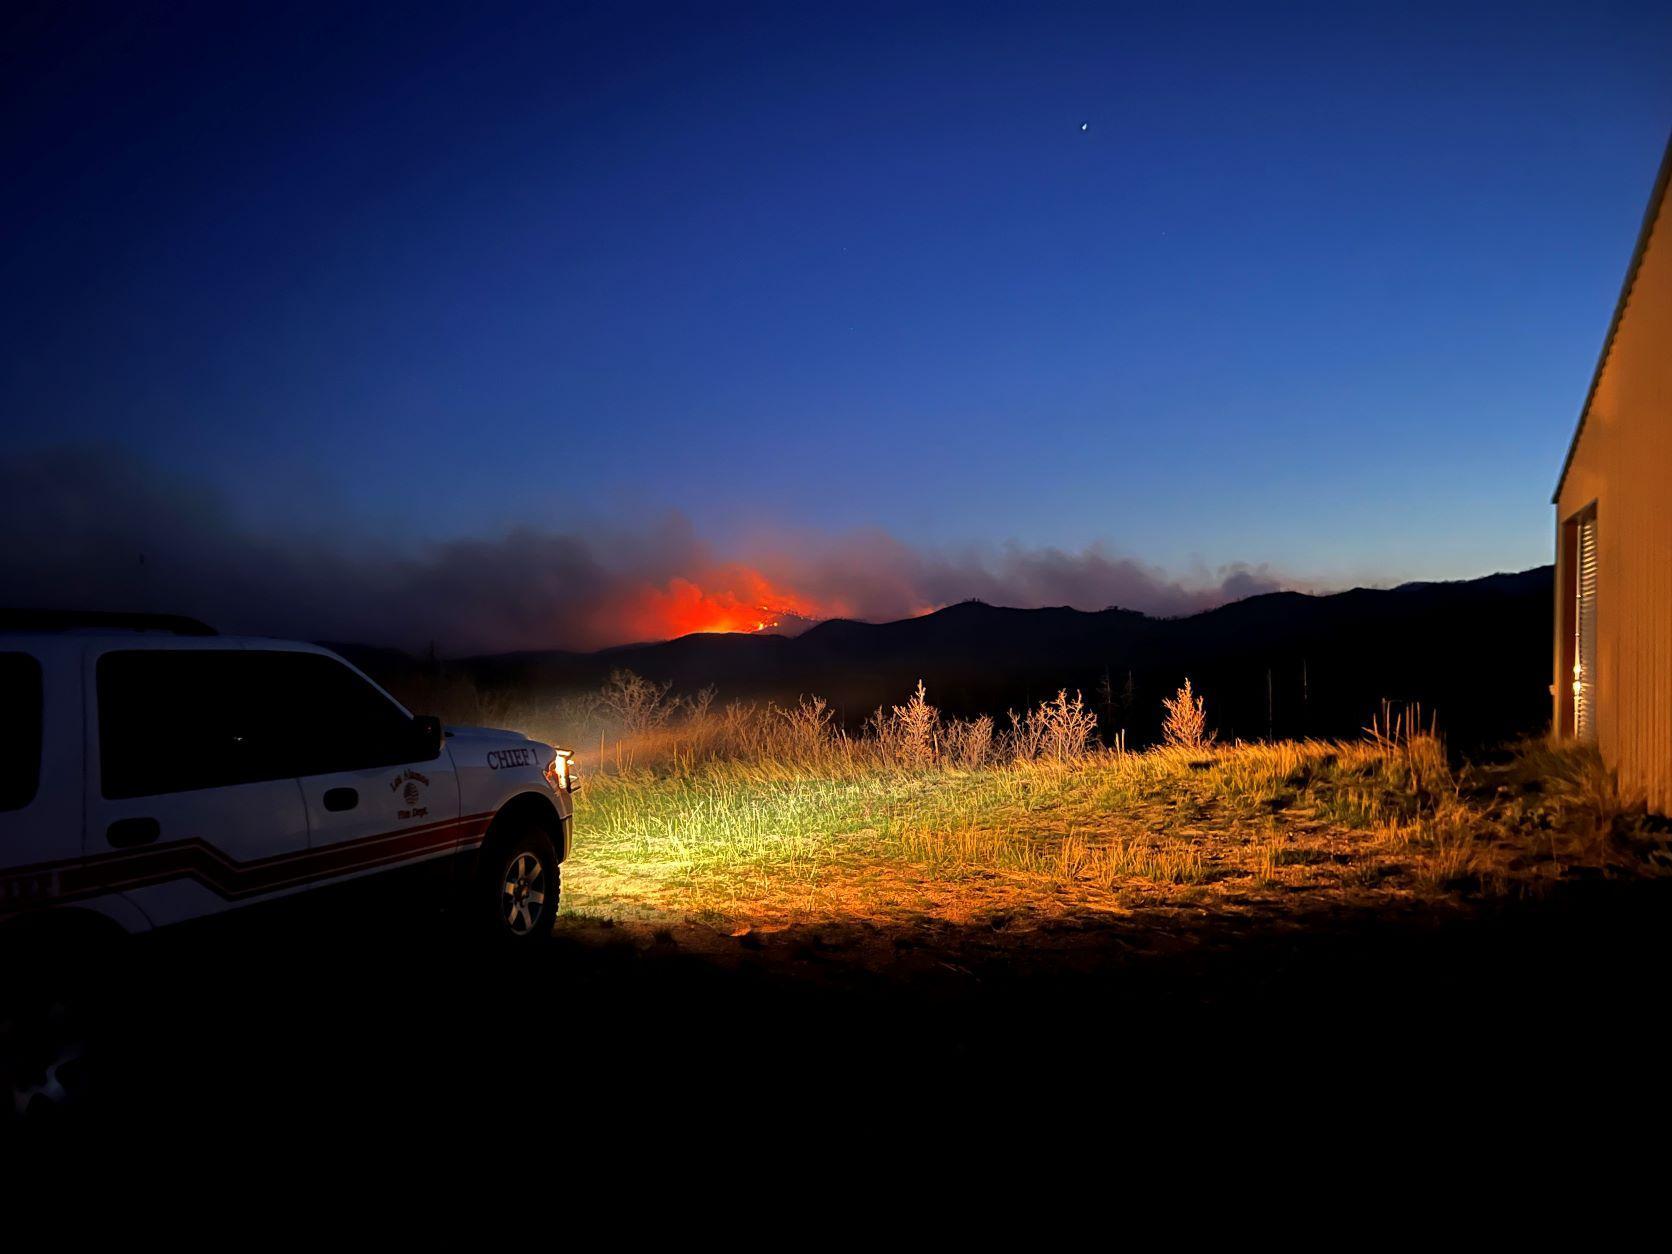 Fire glows in the distance with a fire vehicle in the foreground.